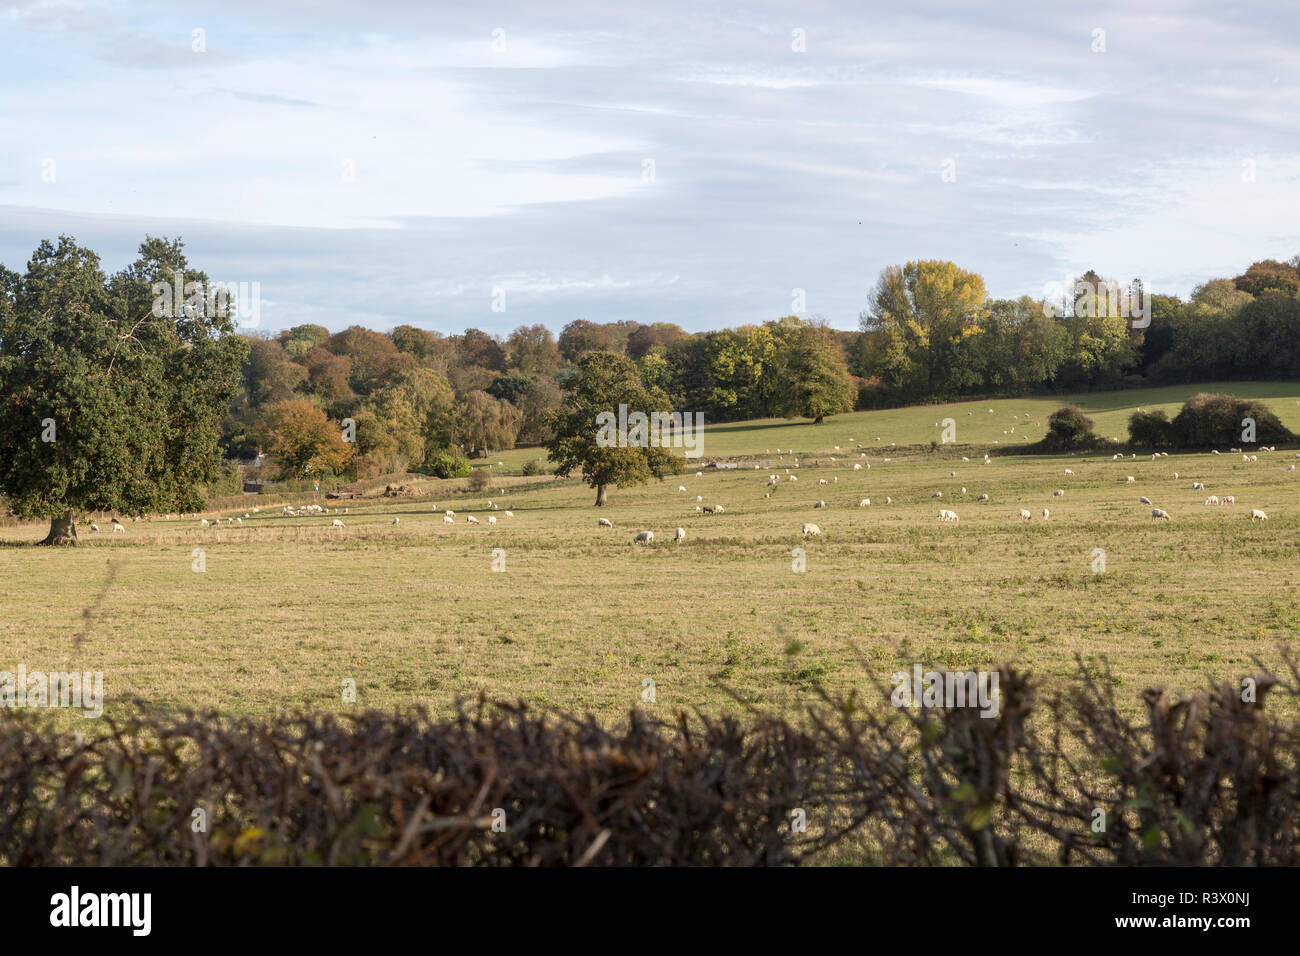 Sheep grazing in fields at Compton Bassett, Wiltshire, England, UK Stock Photo